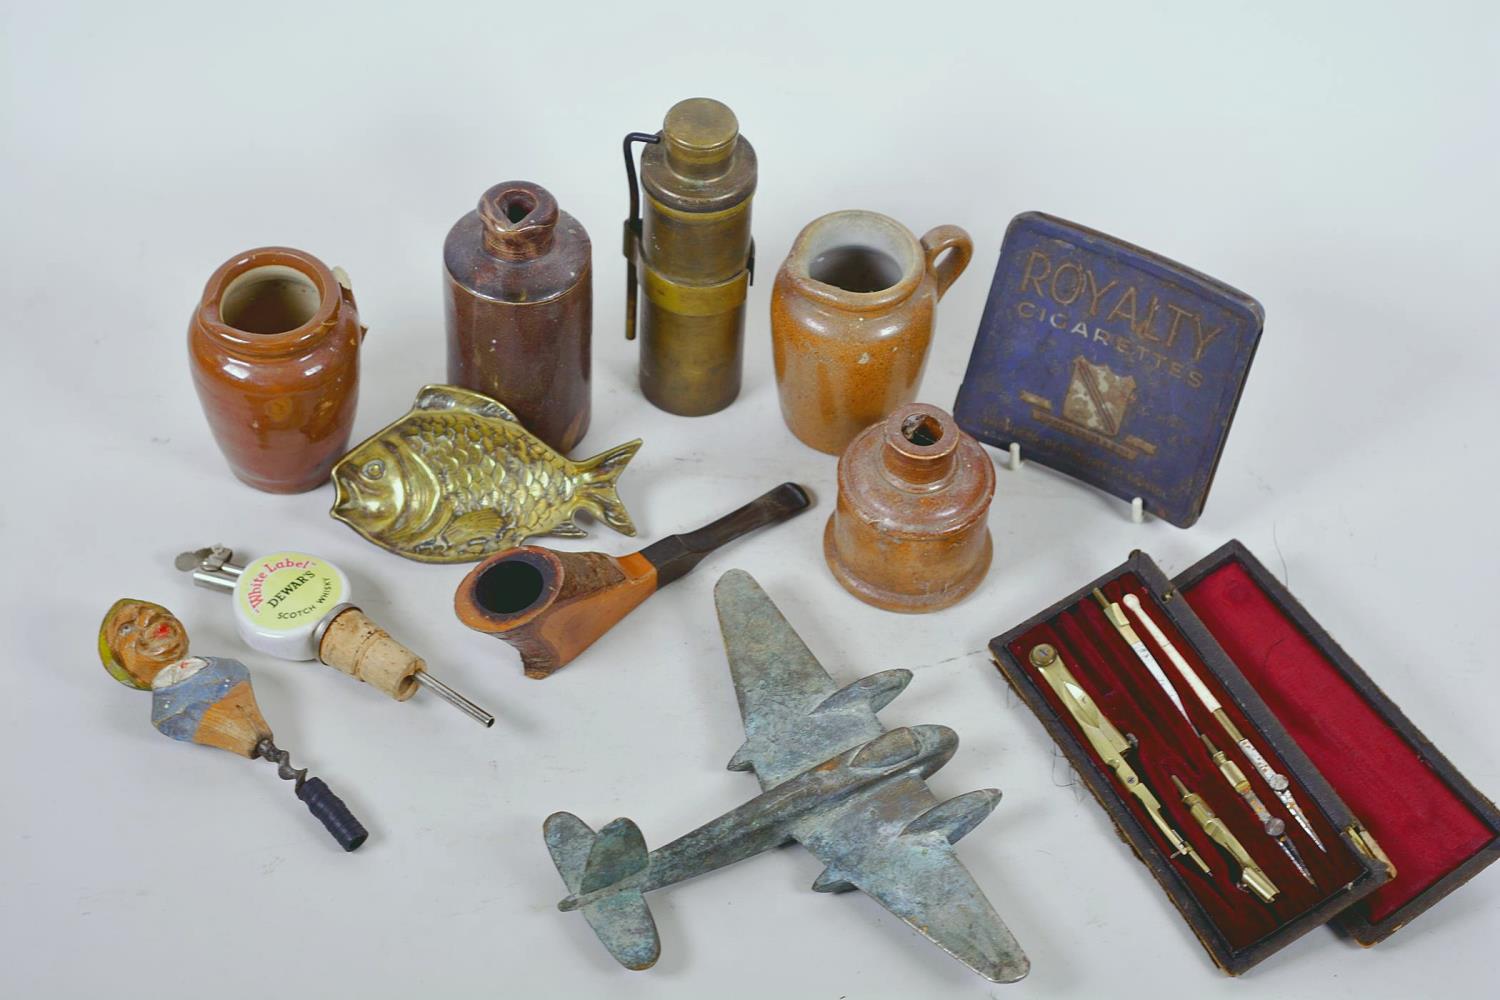 A box of collectables including a brass model Mosquito aircraft, Royalty cigarette tin, drawing set,